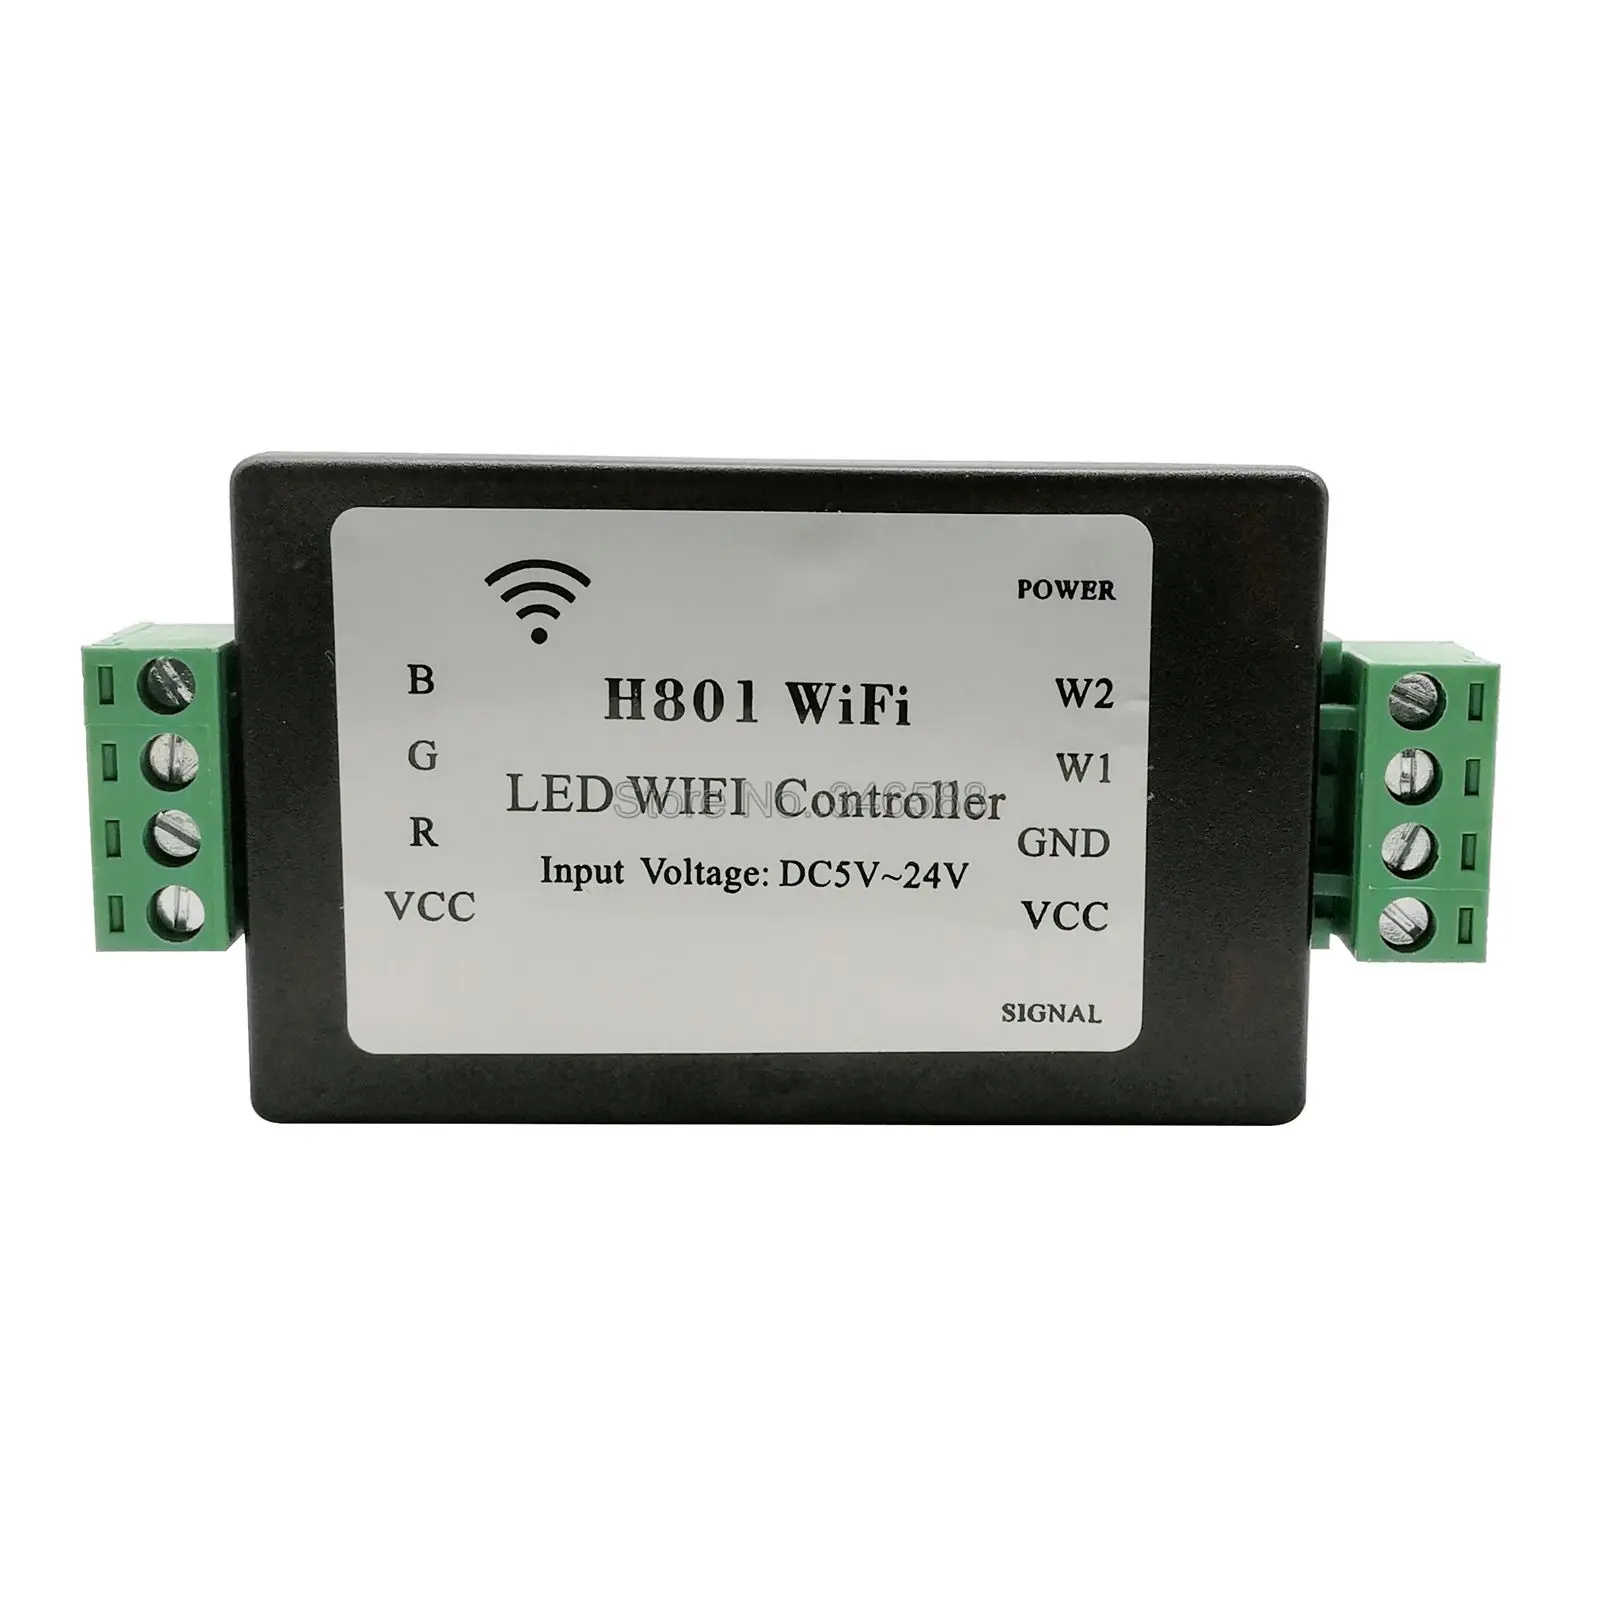 H801 WiFi RGBW LED Controller H801WiFi LED Strip Controller;DC5-24V input;4CH*4A output Android Phone APP WLAN Router Control